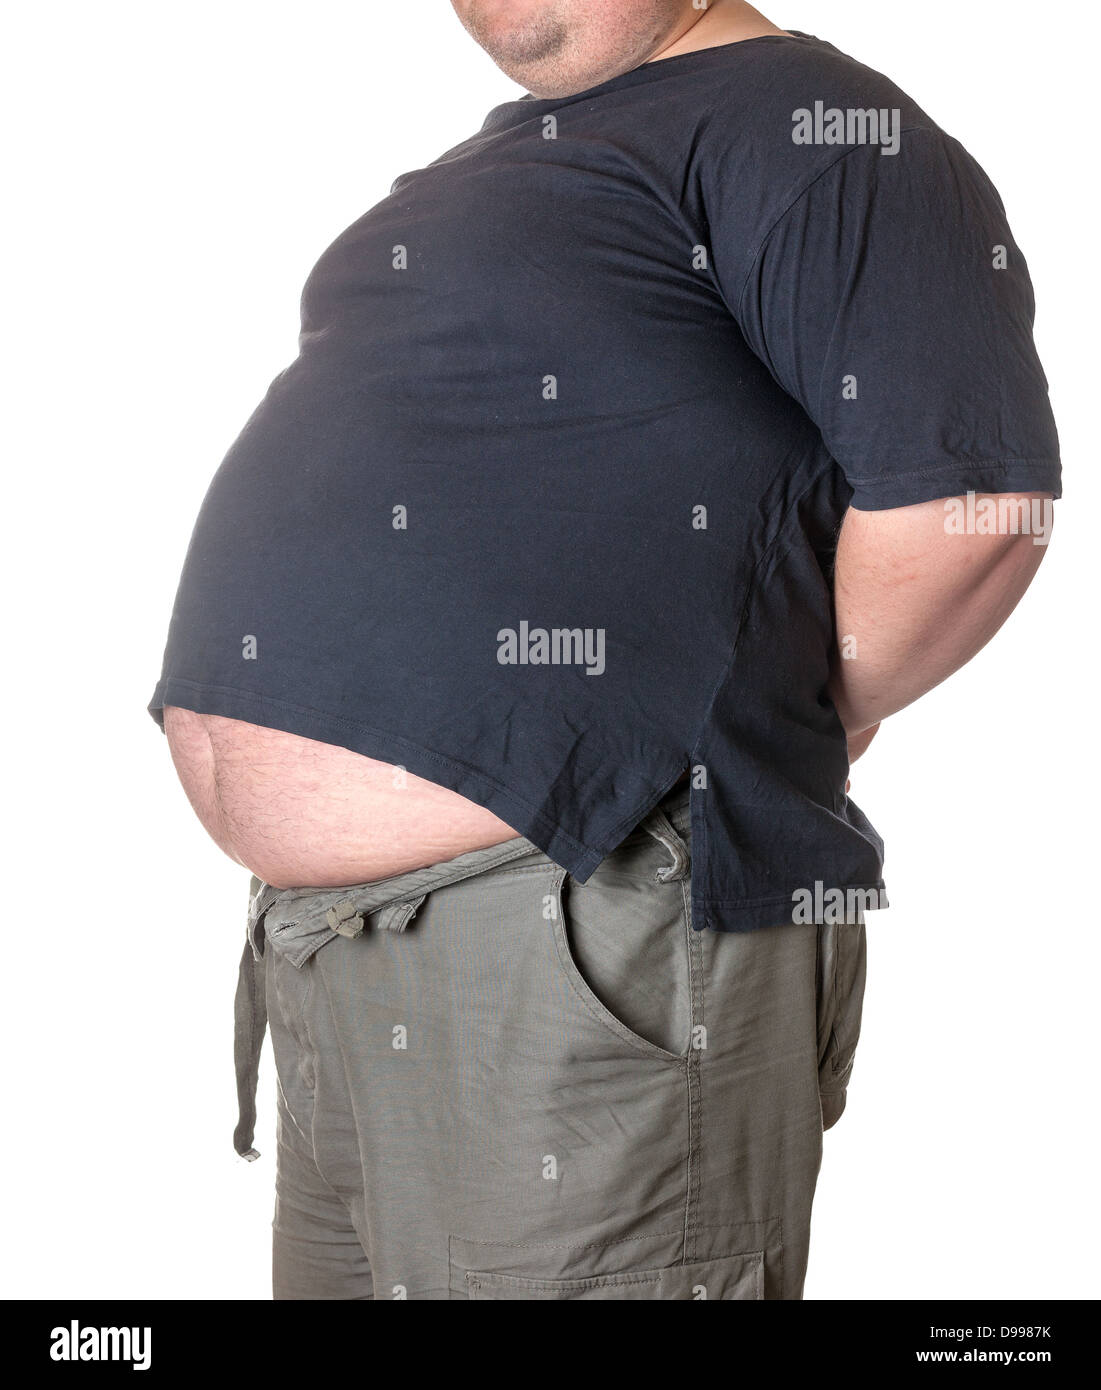 Fat man with a big belly, close-up part of the body Stock Photo